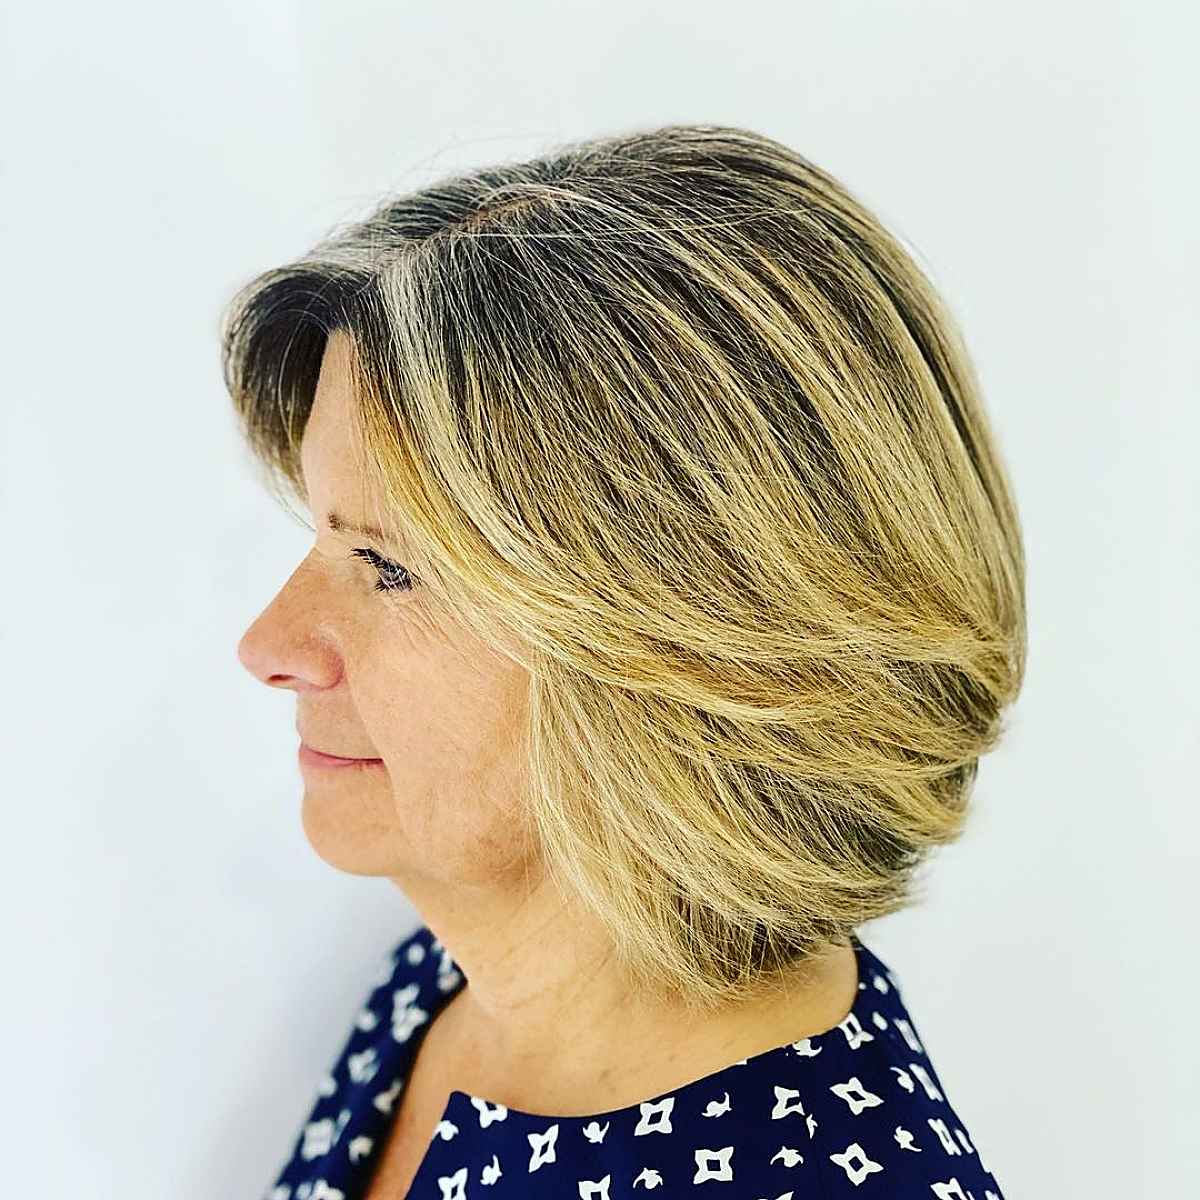 51 Must-Try Hairstyles For Women Over 60 | 4Retirees